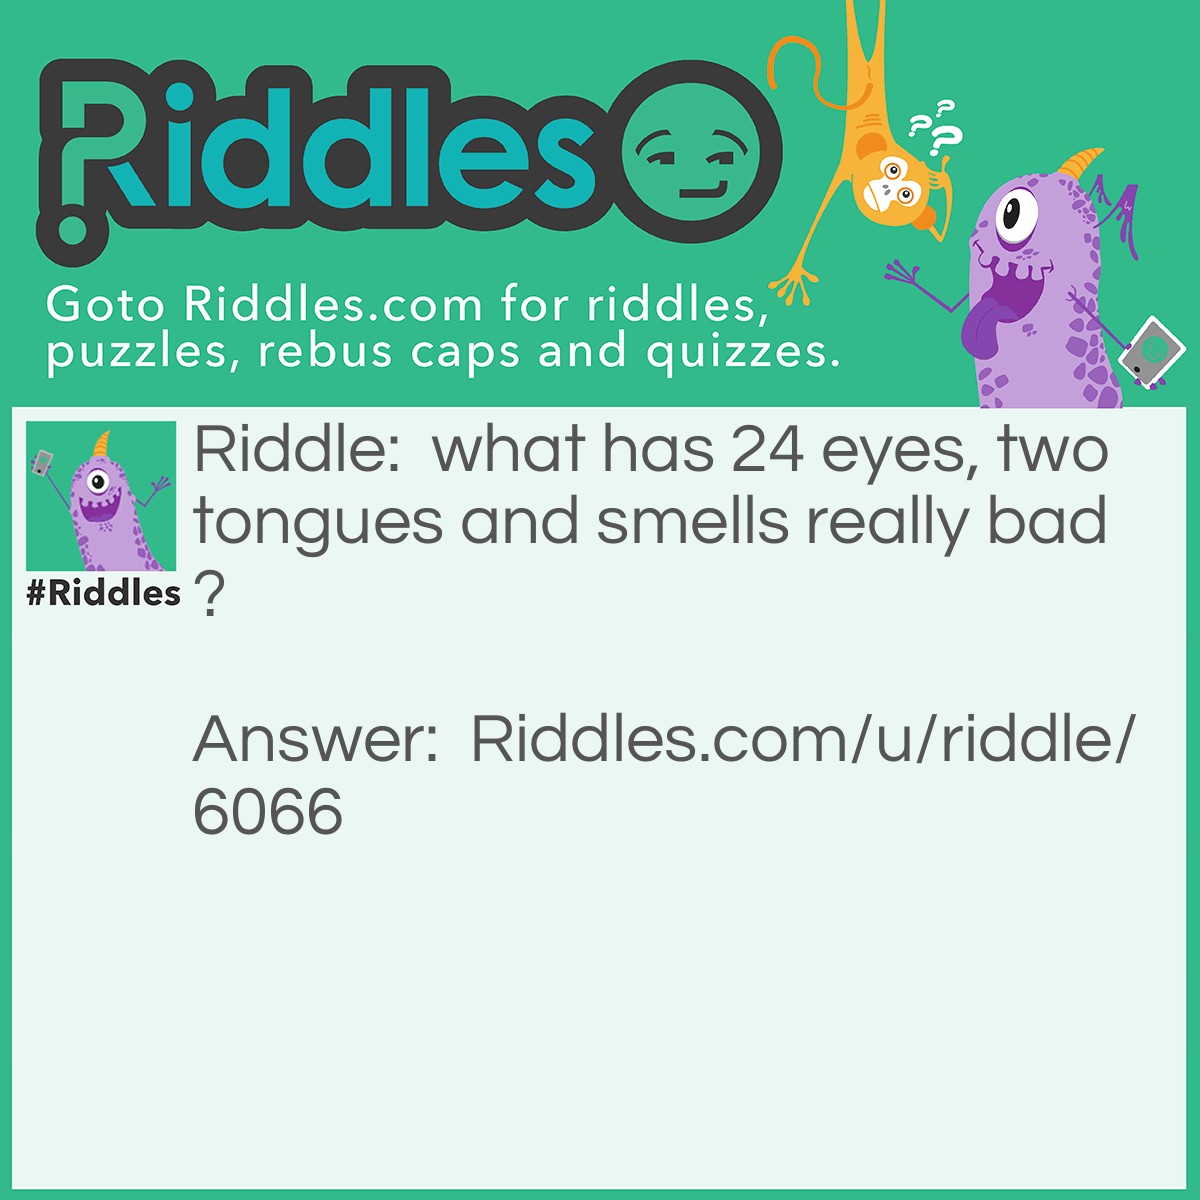 Riddle: what has 24 eyes, two tongues and smells really bad? Answer: A pair of used sneakers.